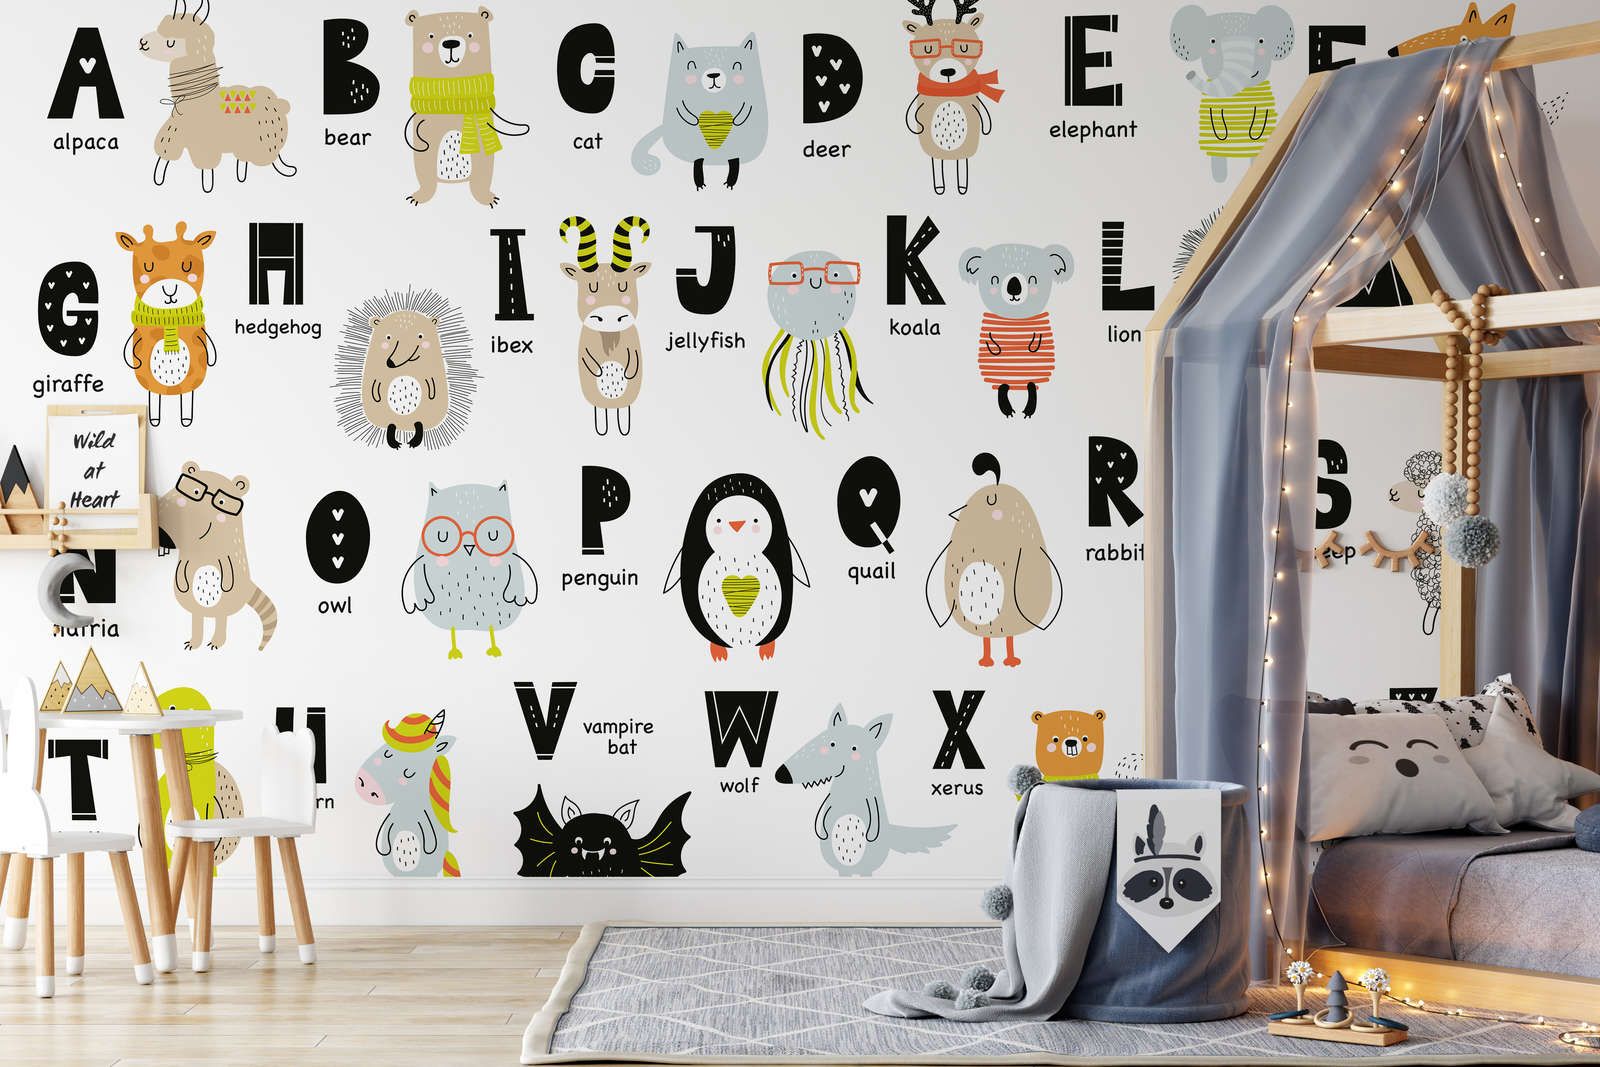             Photo wallpaper Alphabet with animals and animal names - Smooth & pearlescent fleece
        